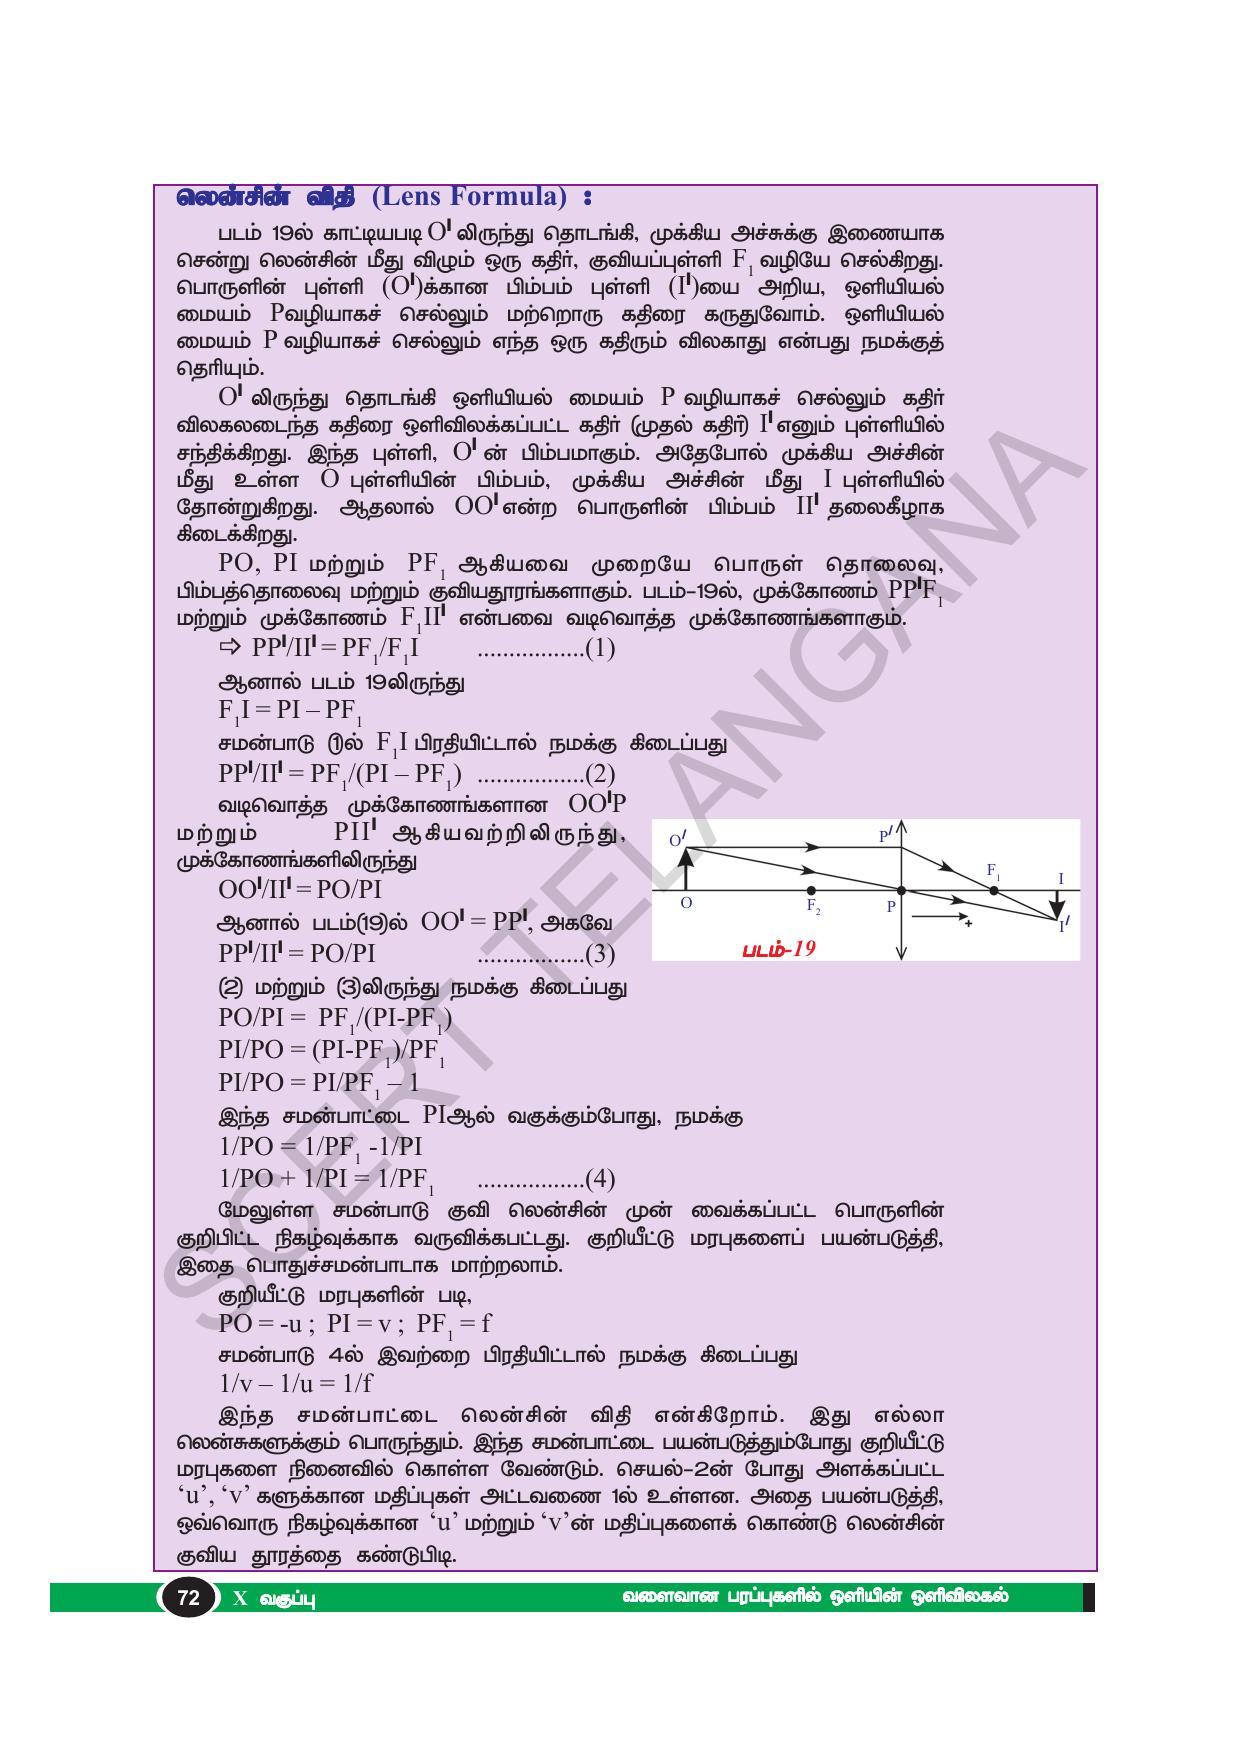 TS SCERT Class 10 Physical Science(Tamil Medium) Text Book - Page 84